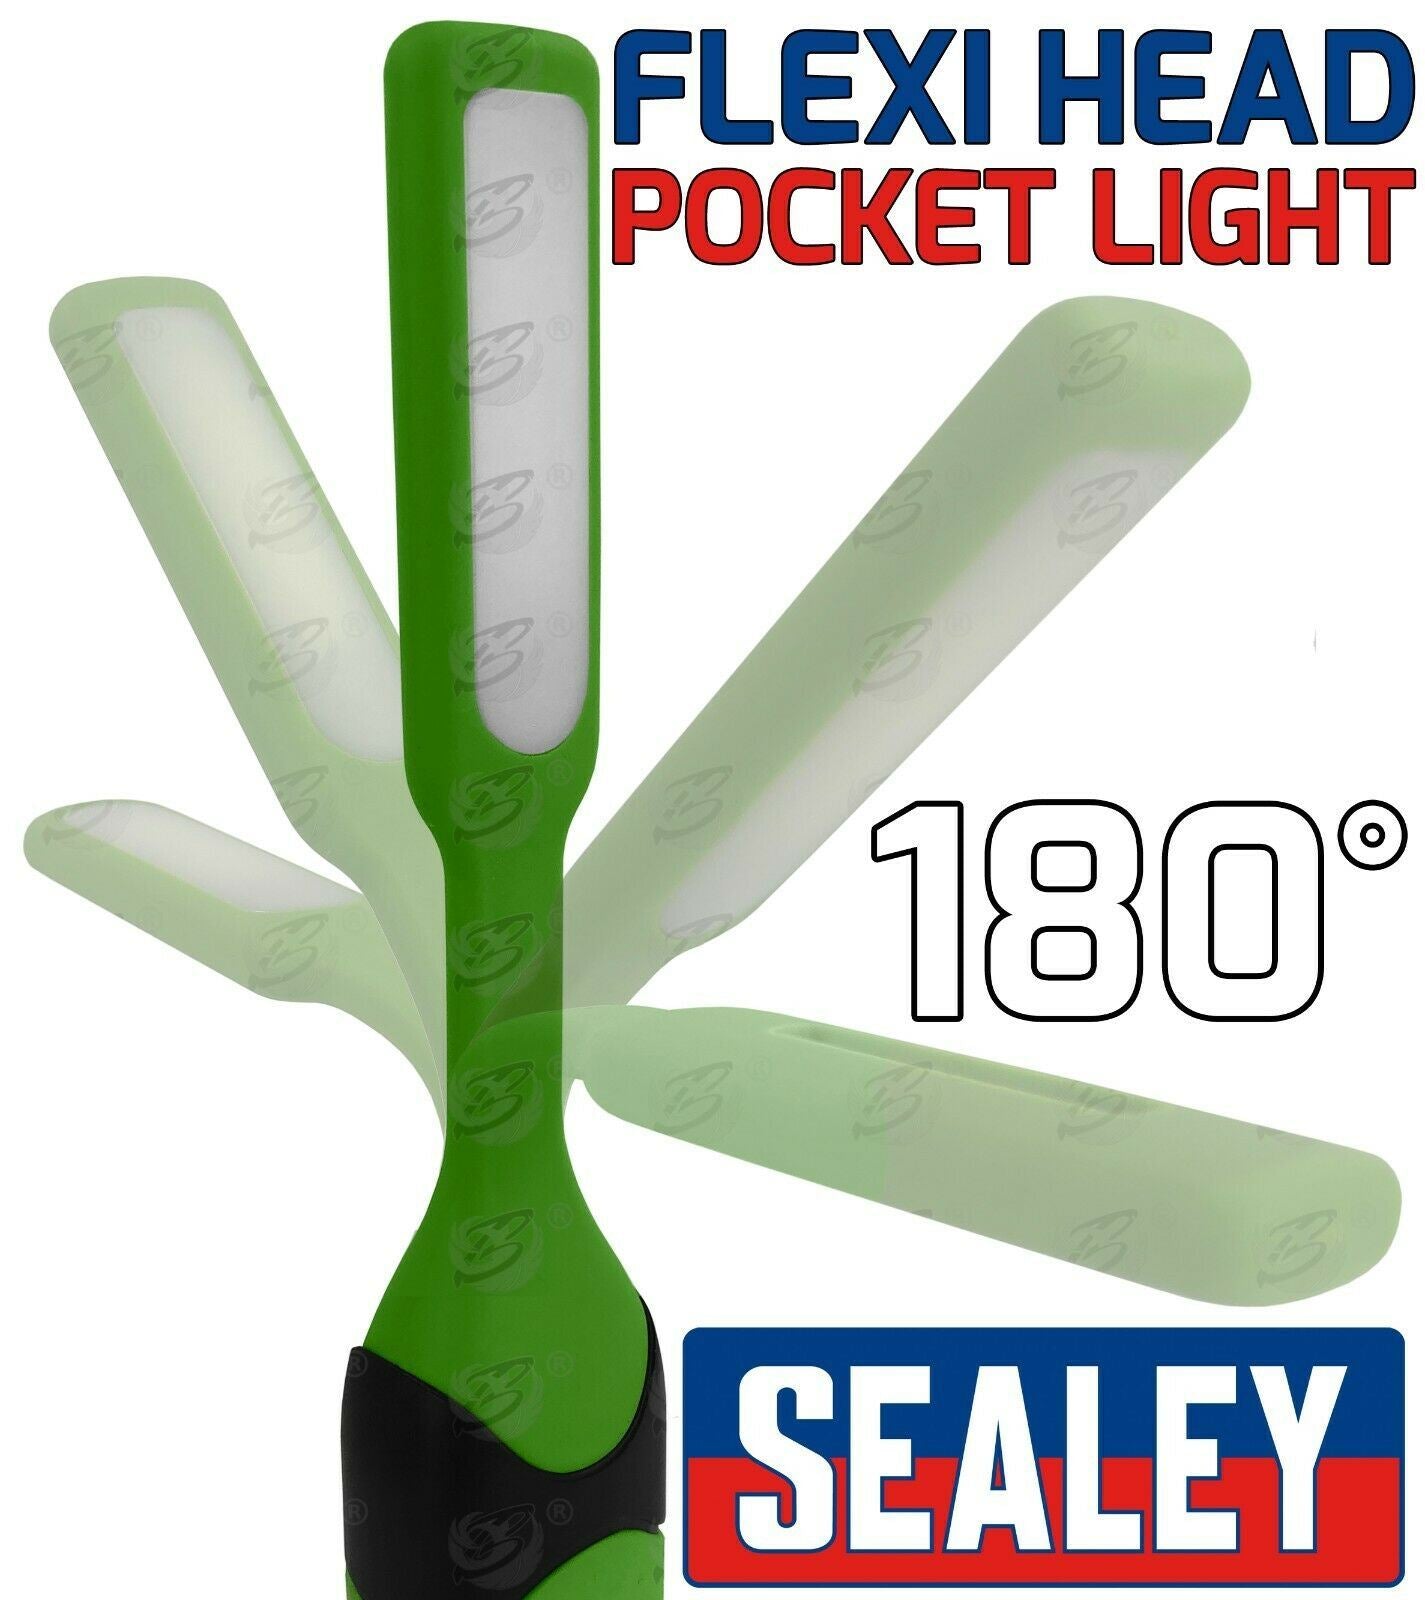 SEALEY SMD LED FLEXIBLE MAGNETIC POCKET INSPECTION TORCH ( GREEN )